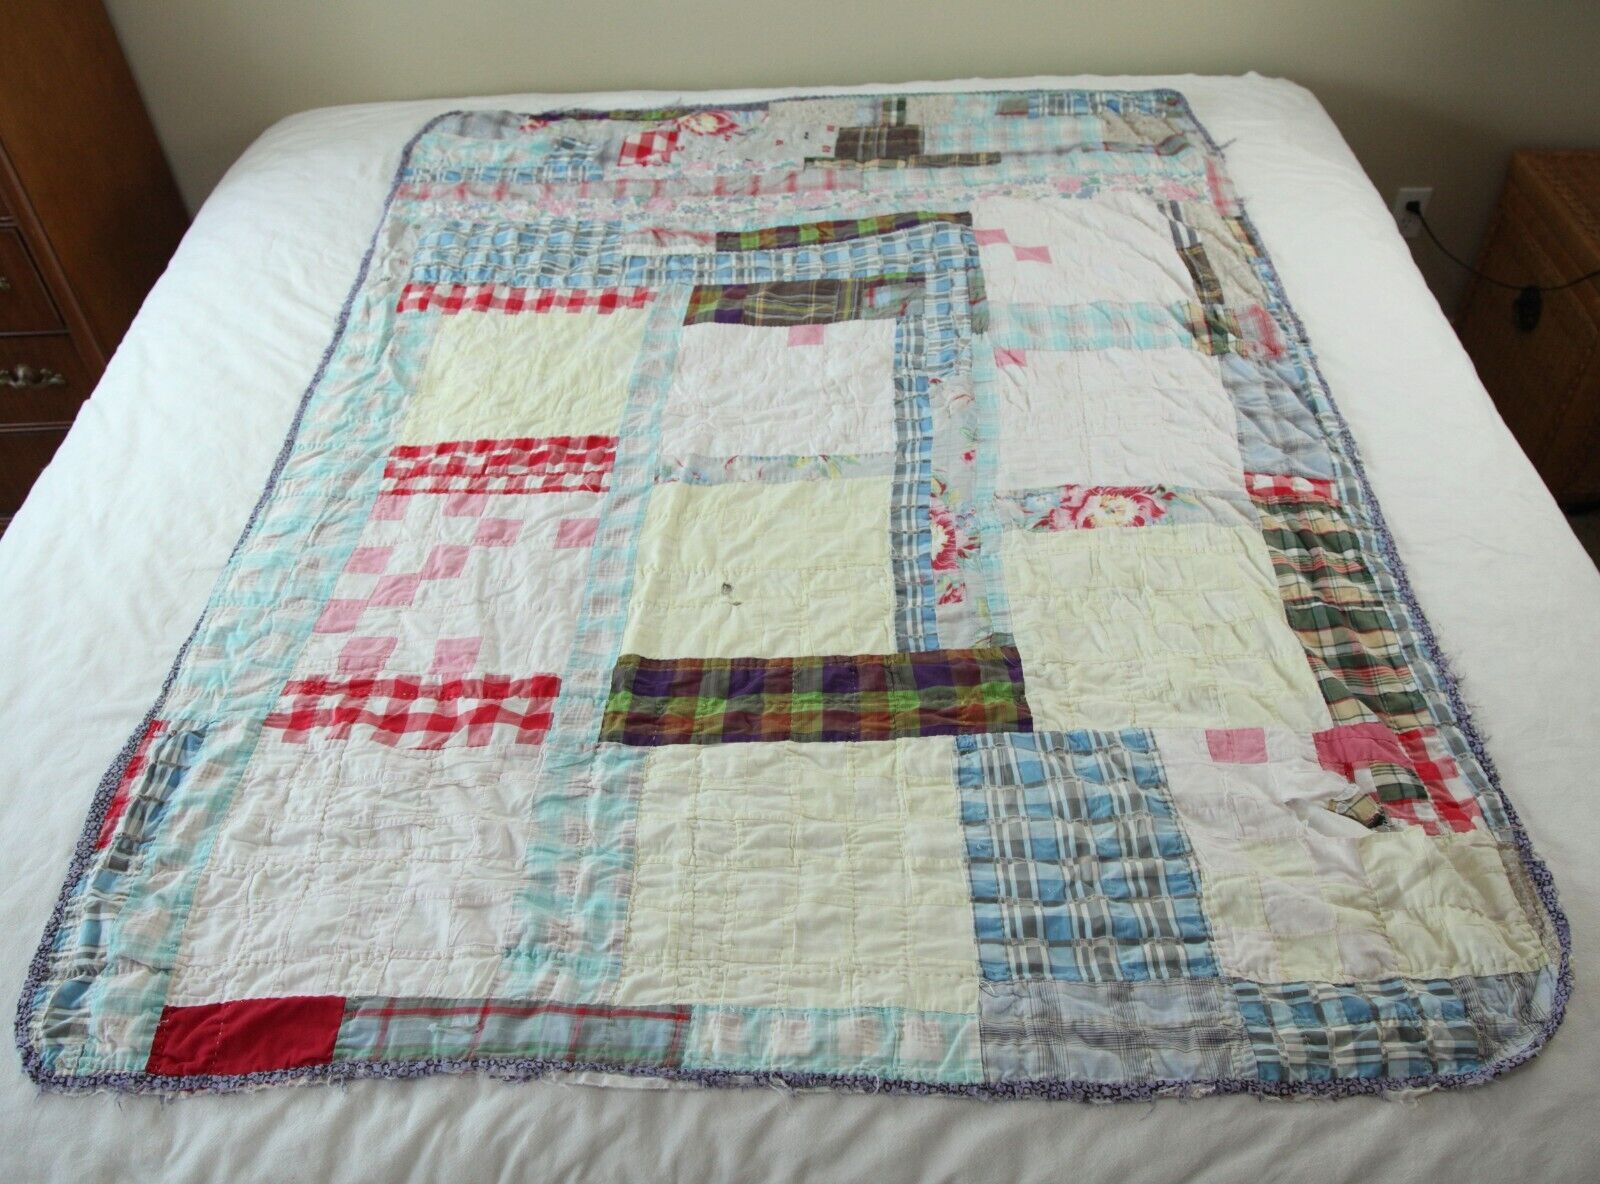 WORN DISTRESSED Antique Old Early Primitive Patchwork Quilt Scrappy Rayon Plaid